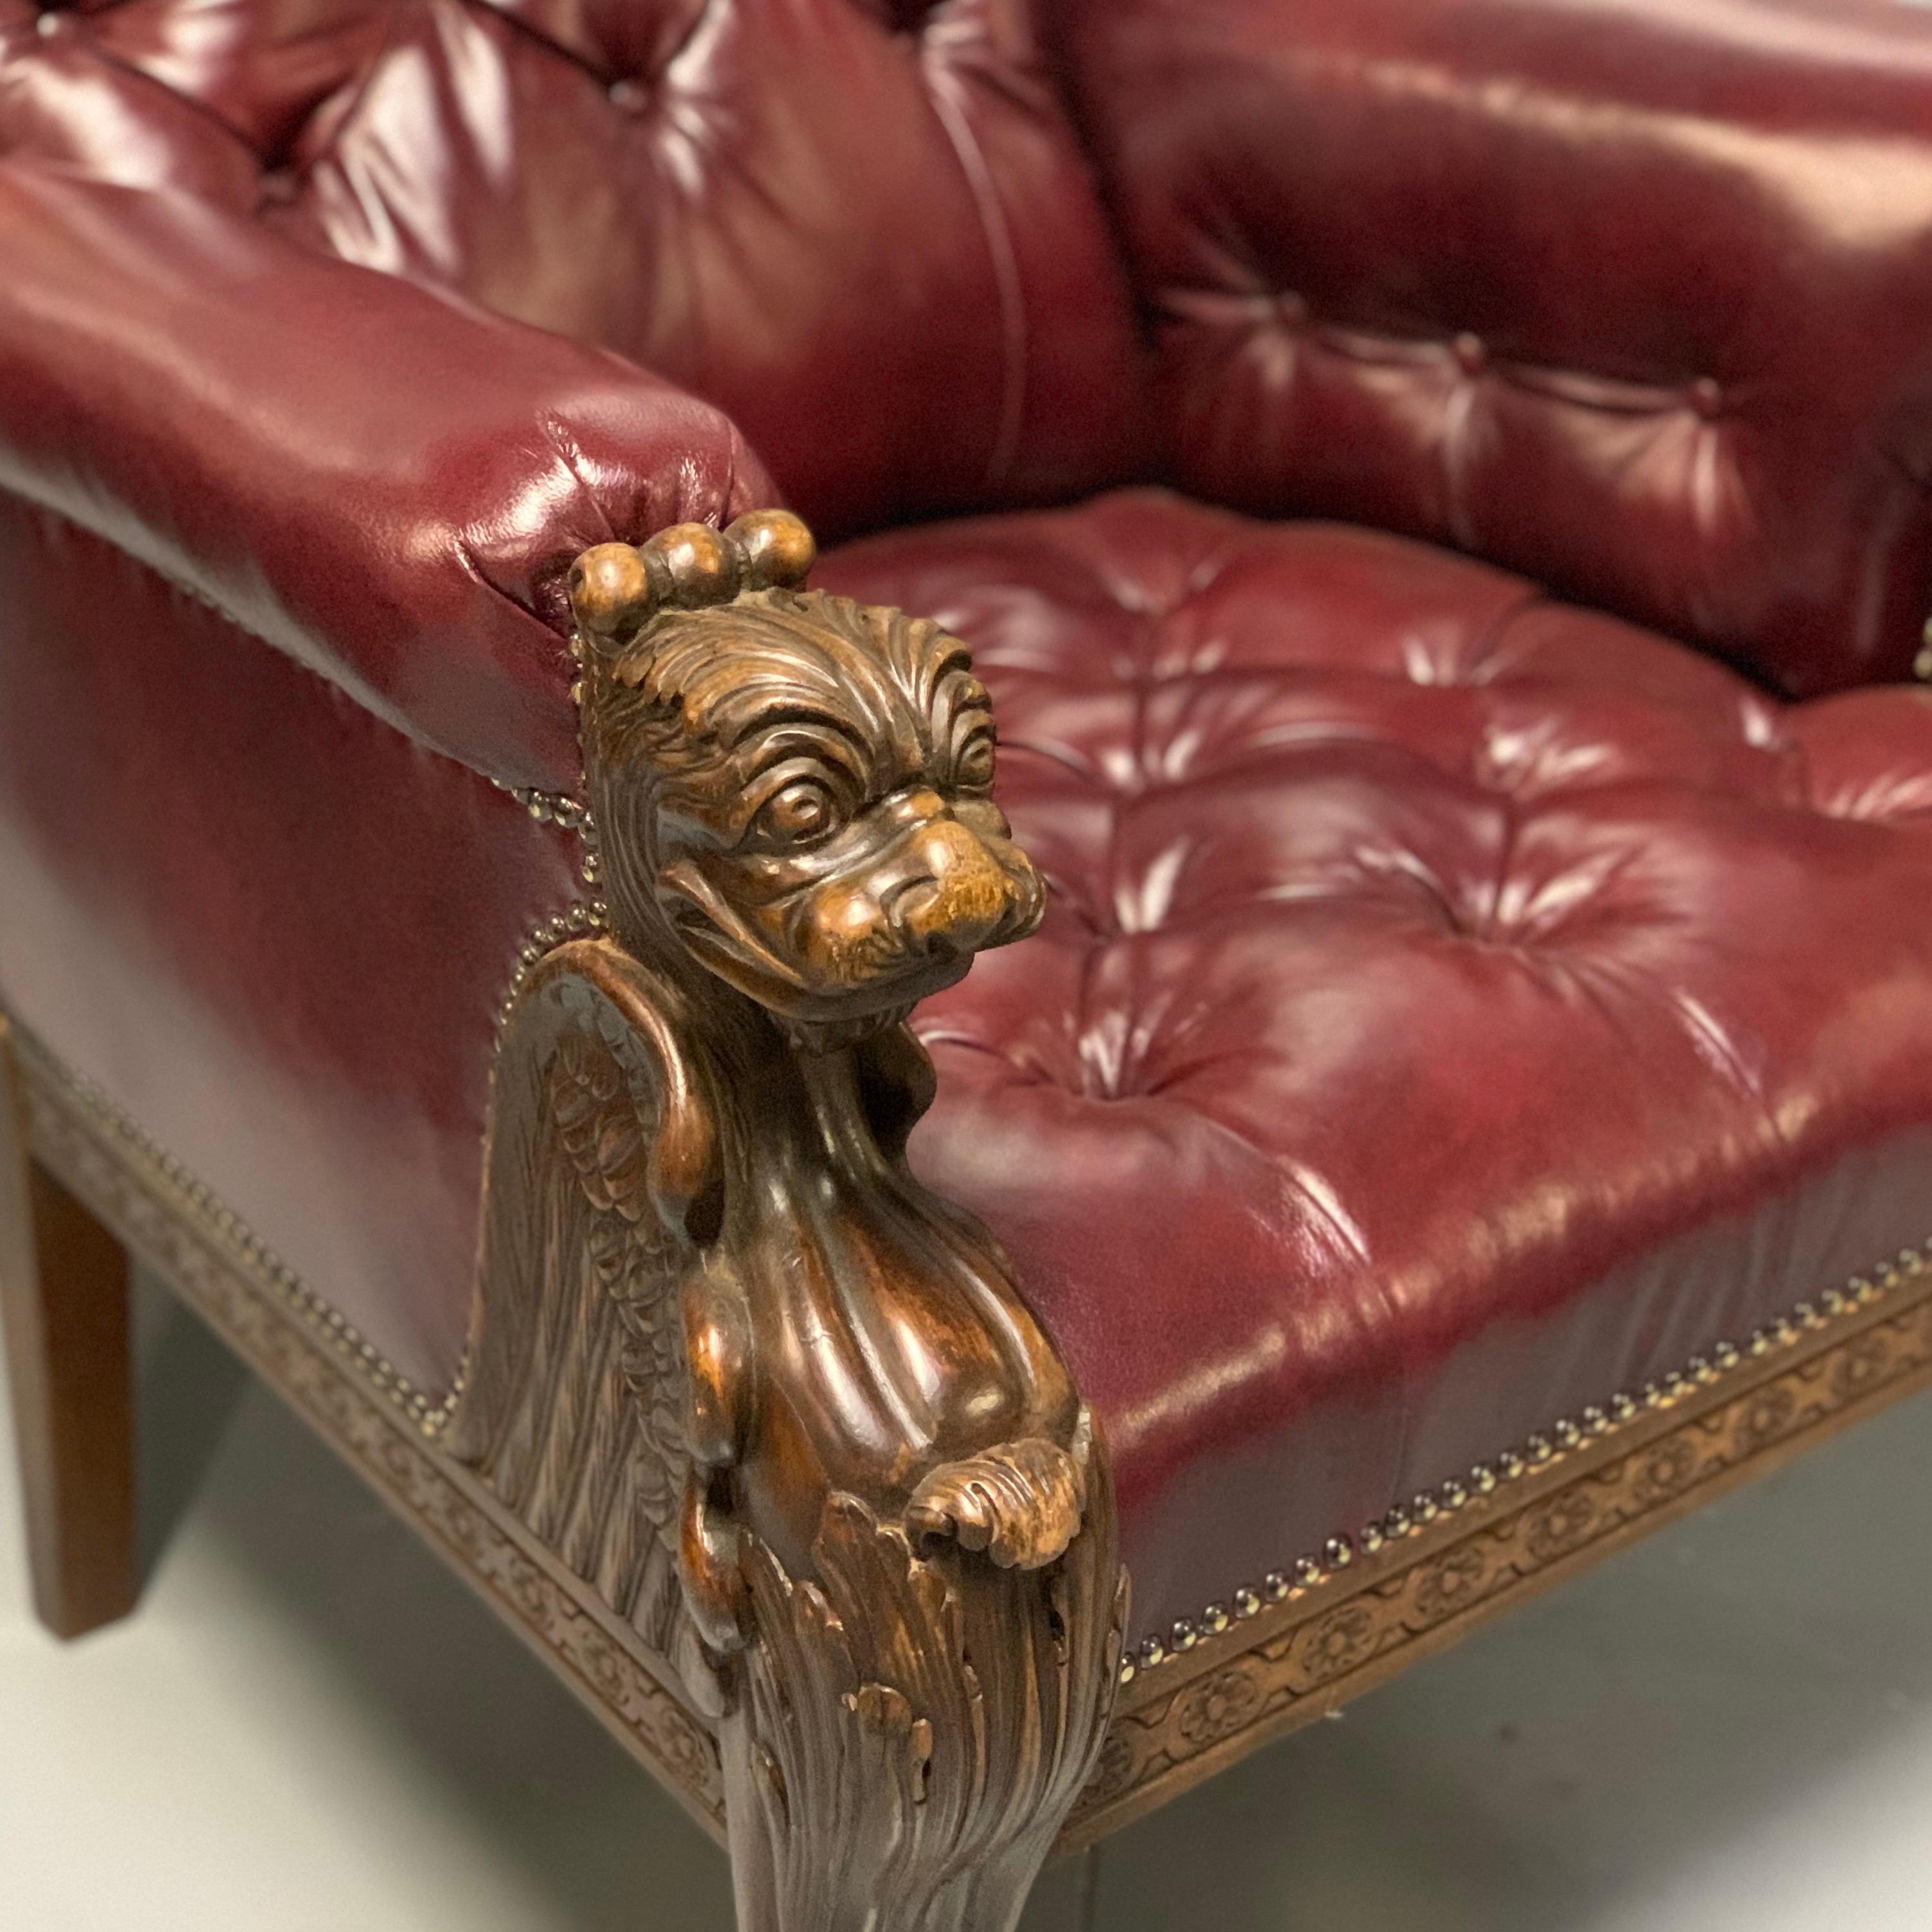 Large Pair of Mid-19th Century European Buttoned Leather Armchairs with Griffins For Sale 2